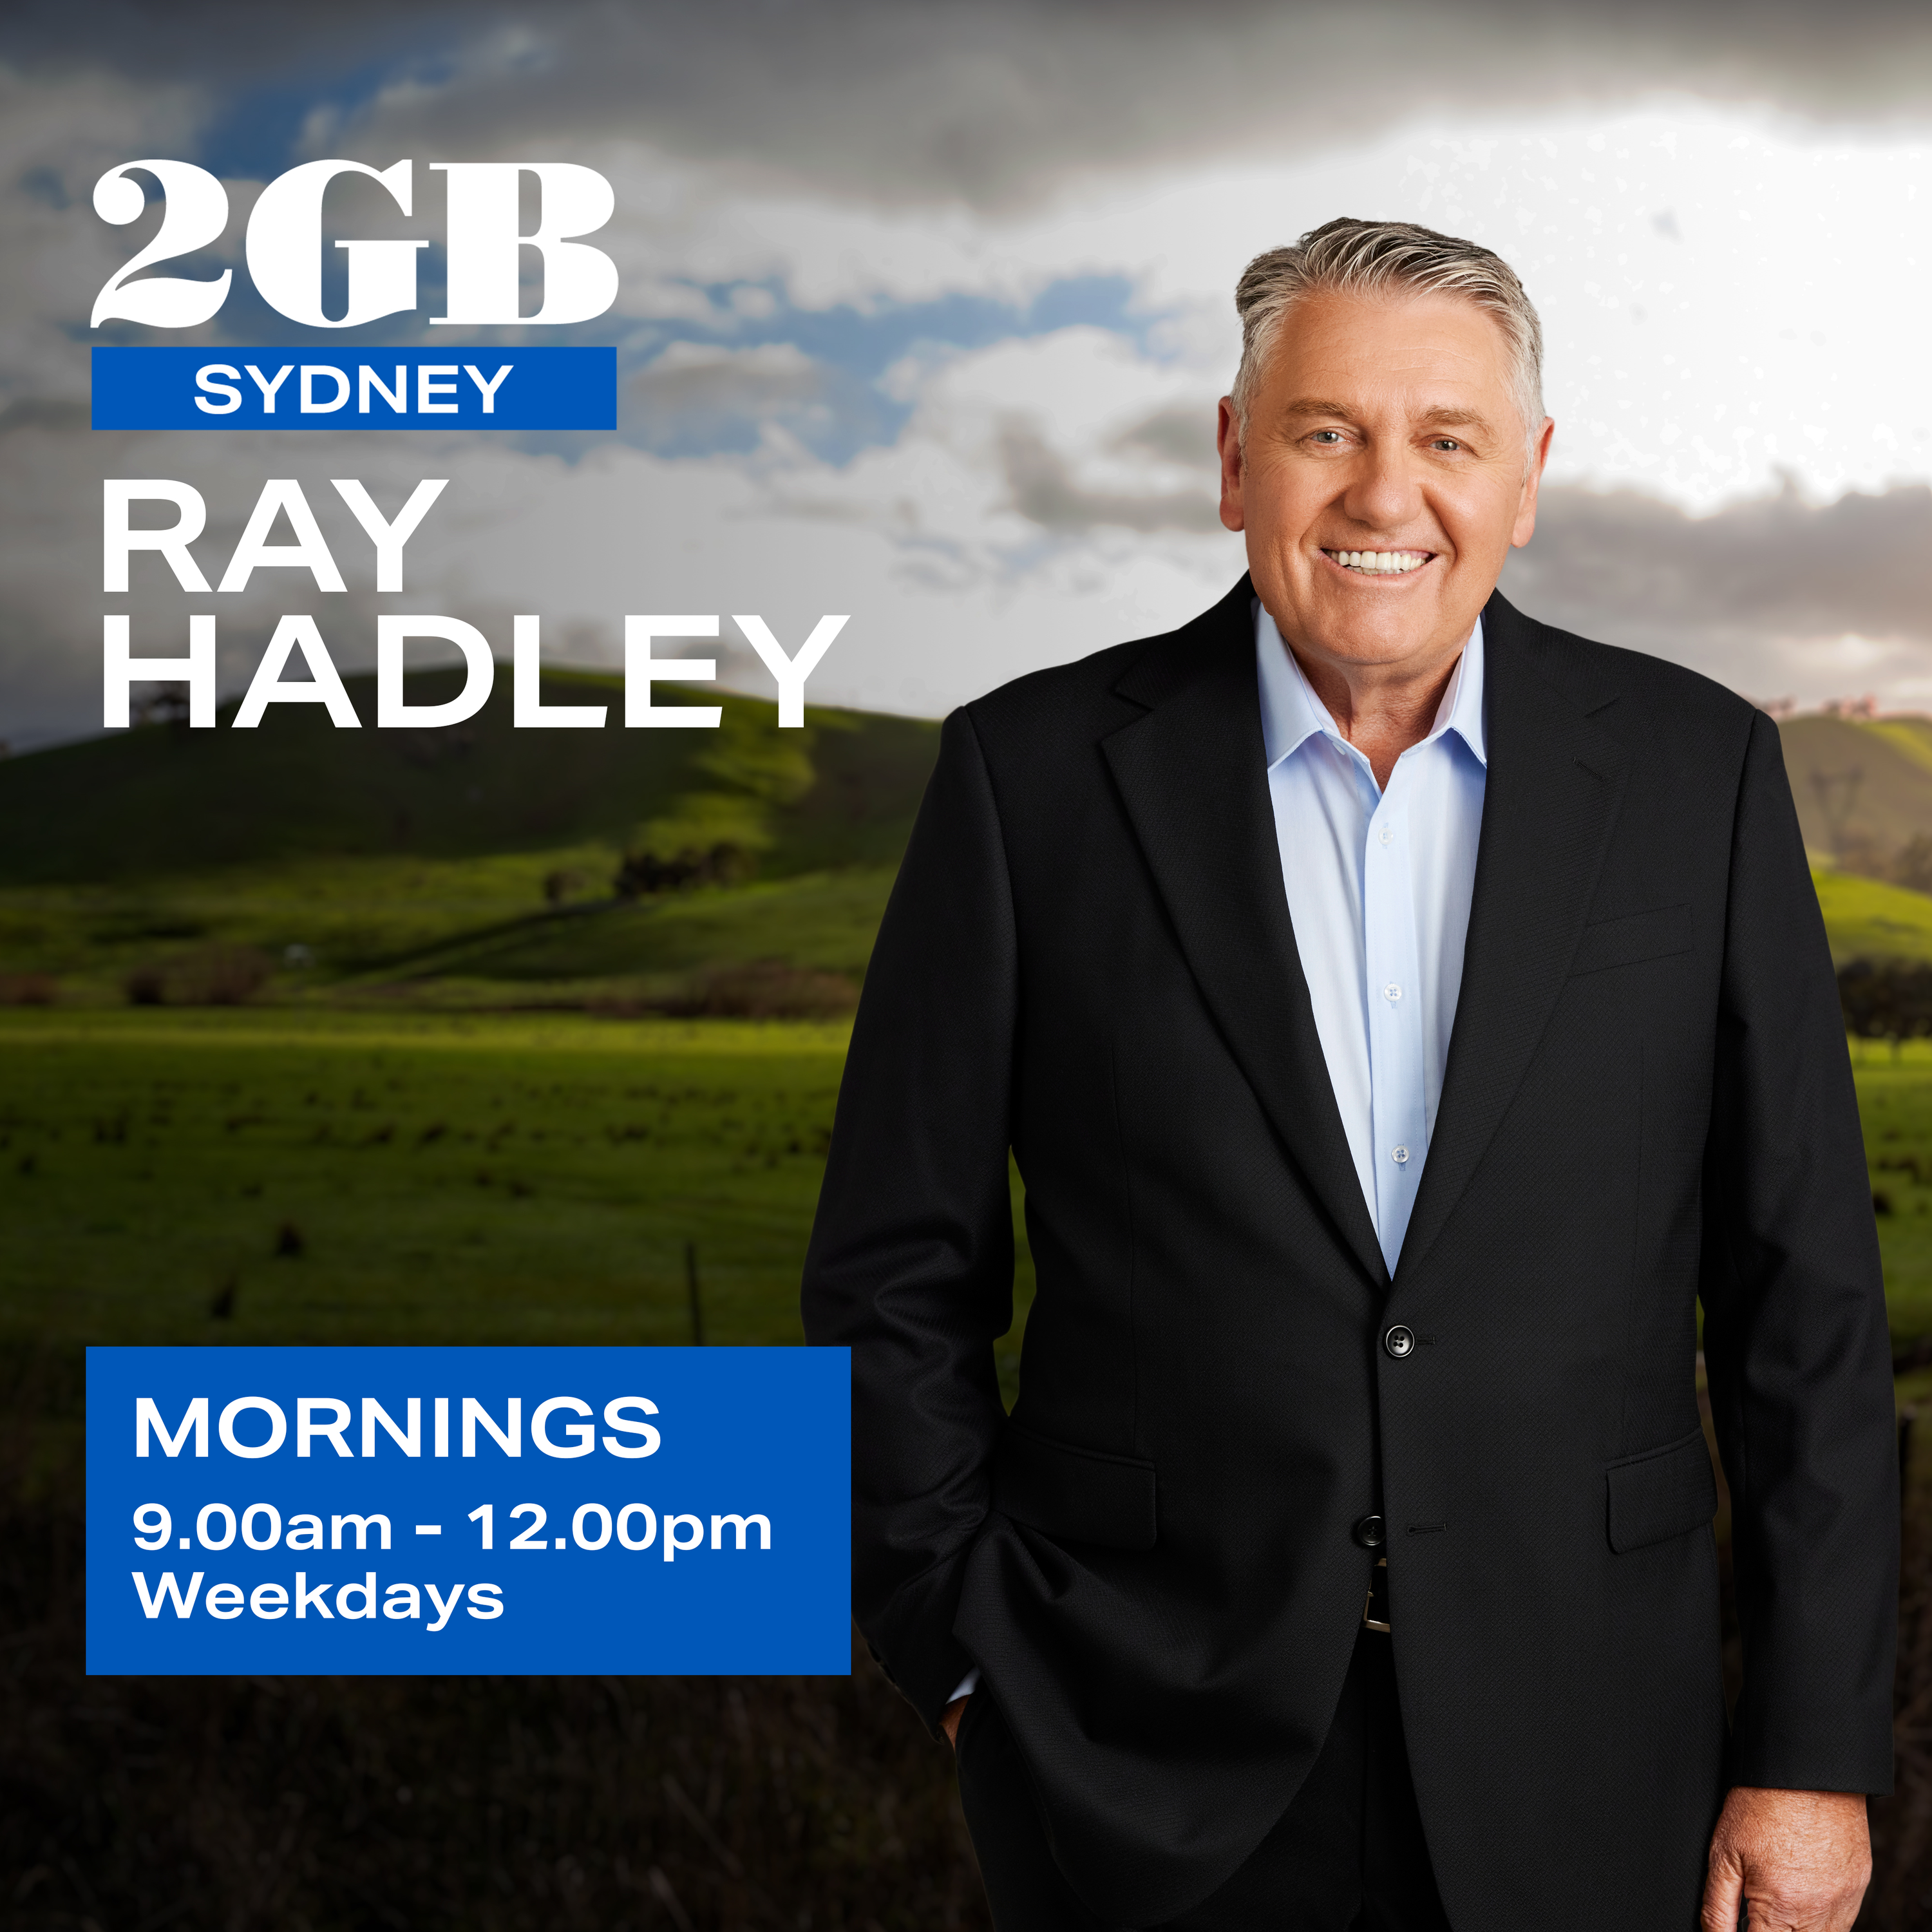 The moment that struck a cord with Ray Hadley on his late mother's birthday